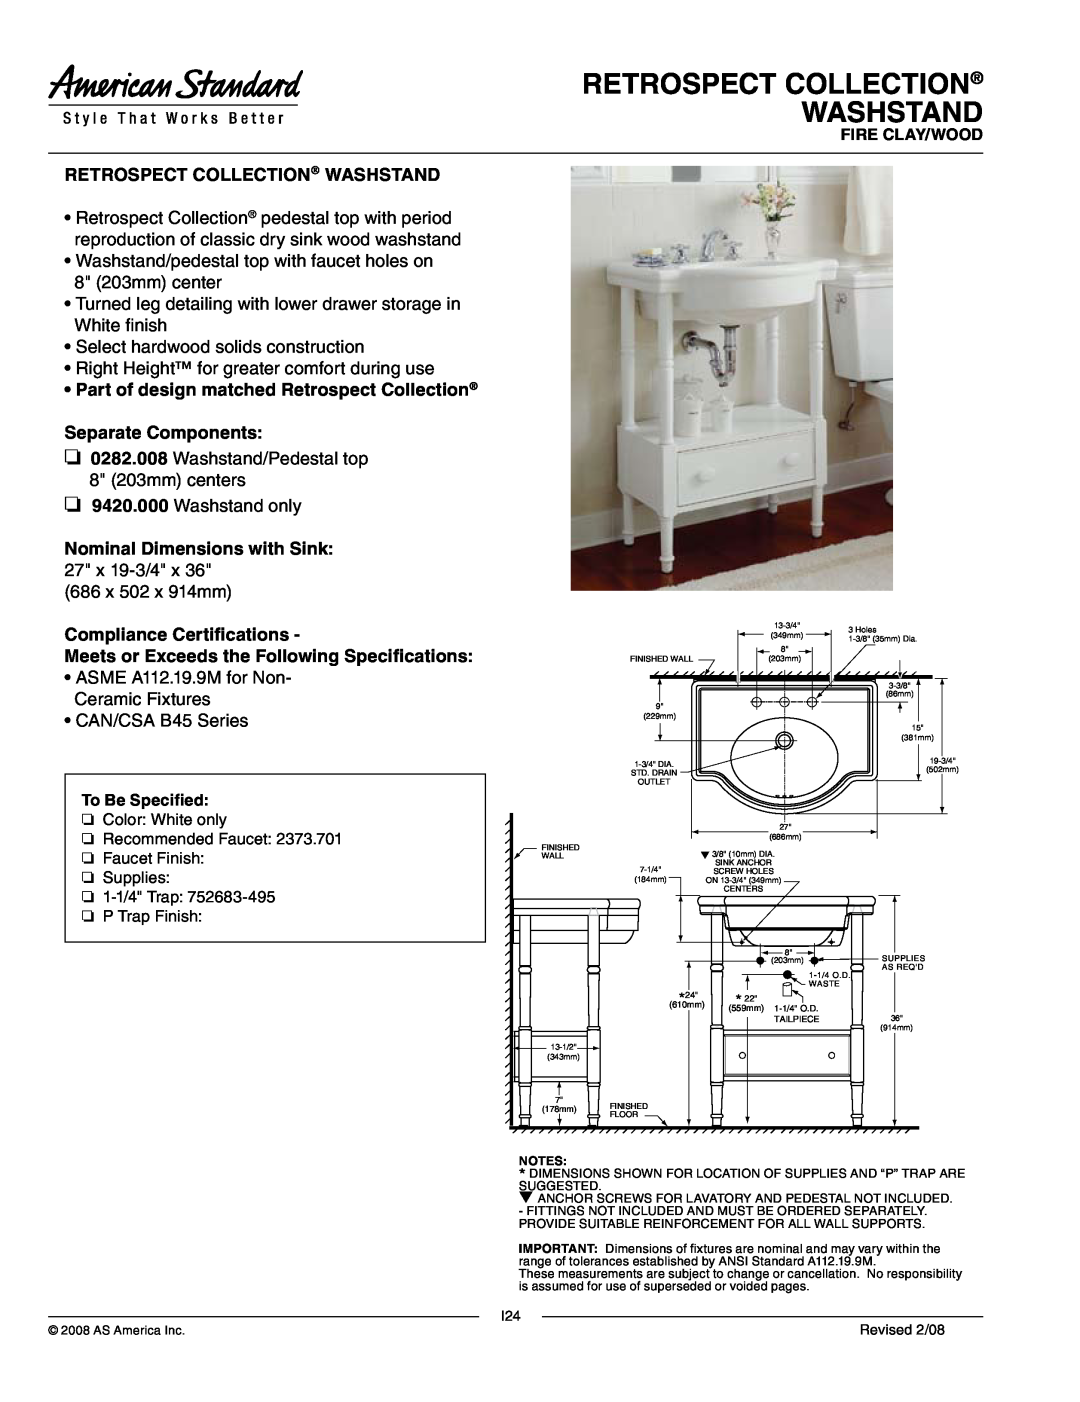 American Standard 9420.000 dimensions Retrospect Collection Washstand, Part of design matched Retrospect Collection 